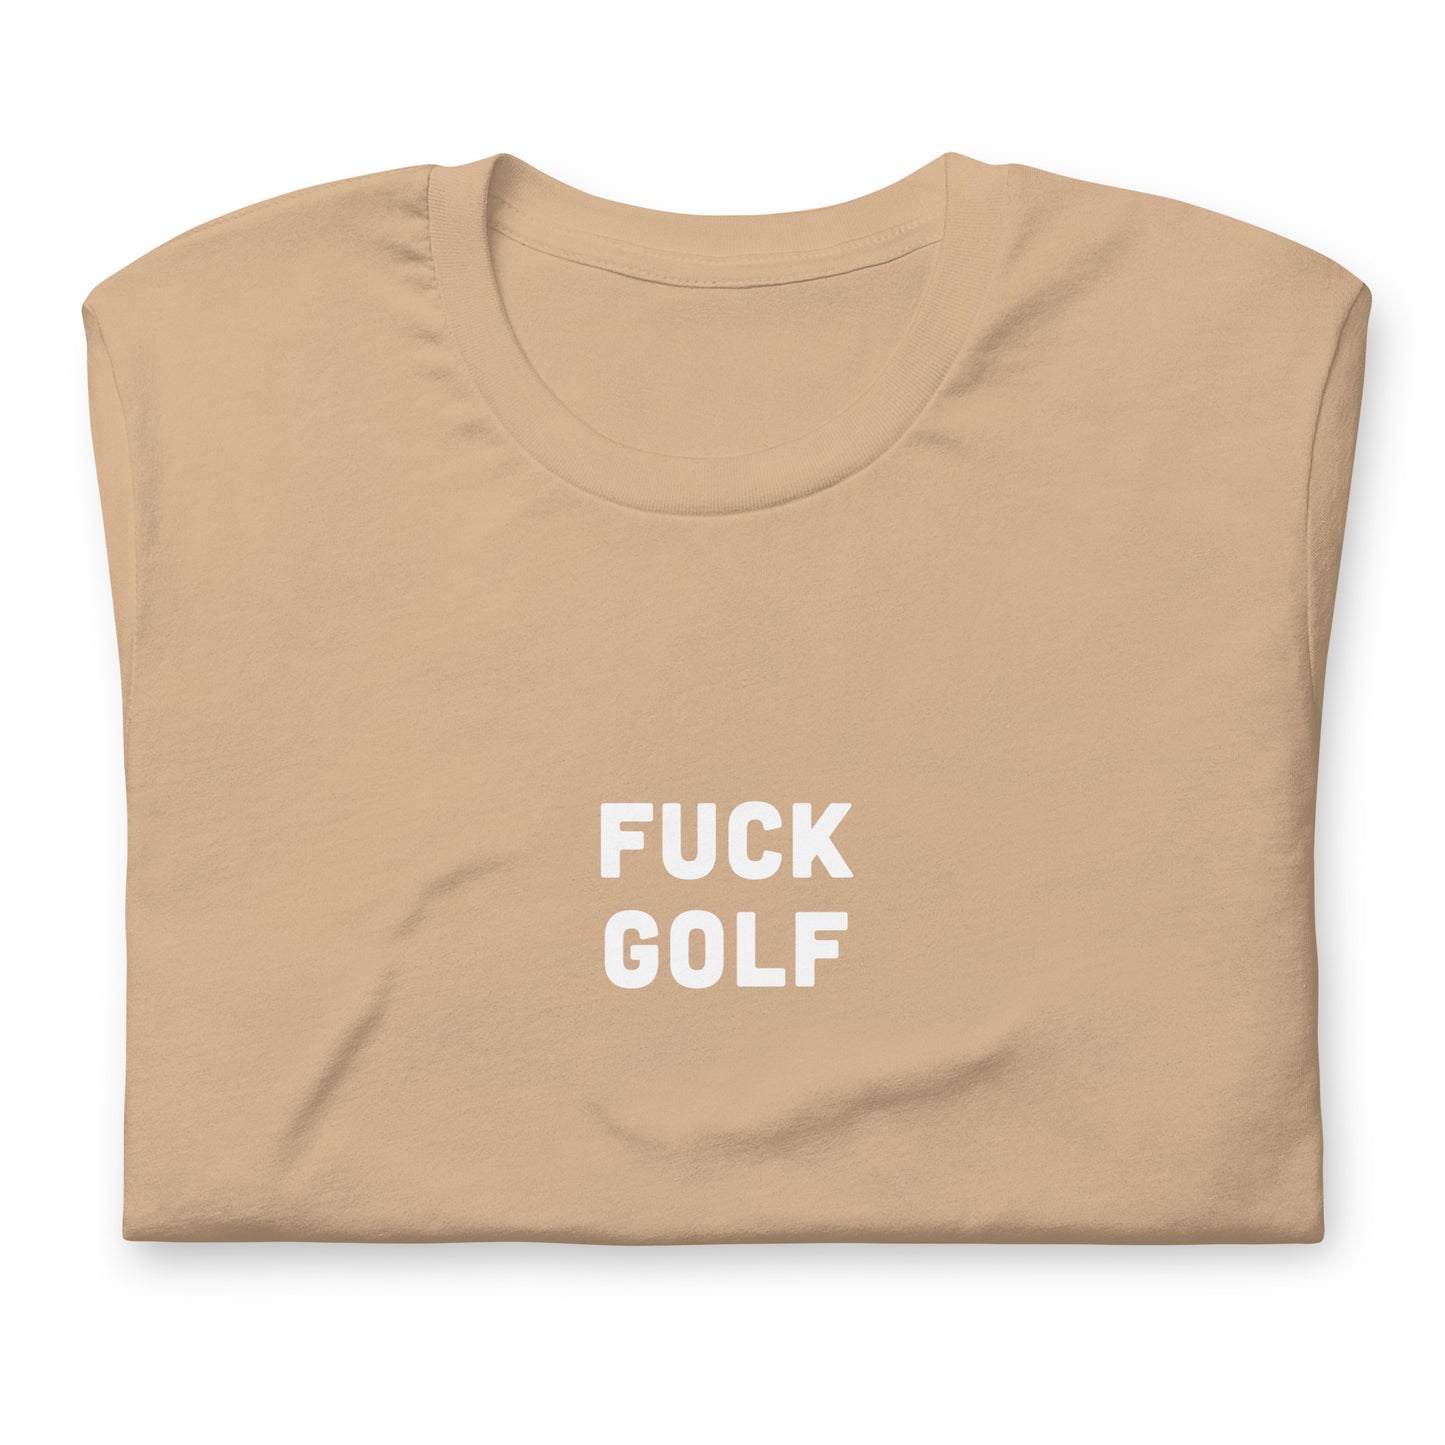 Fuck Golf T-Shirt Size XL Color Forest